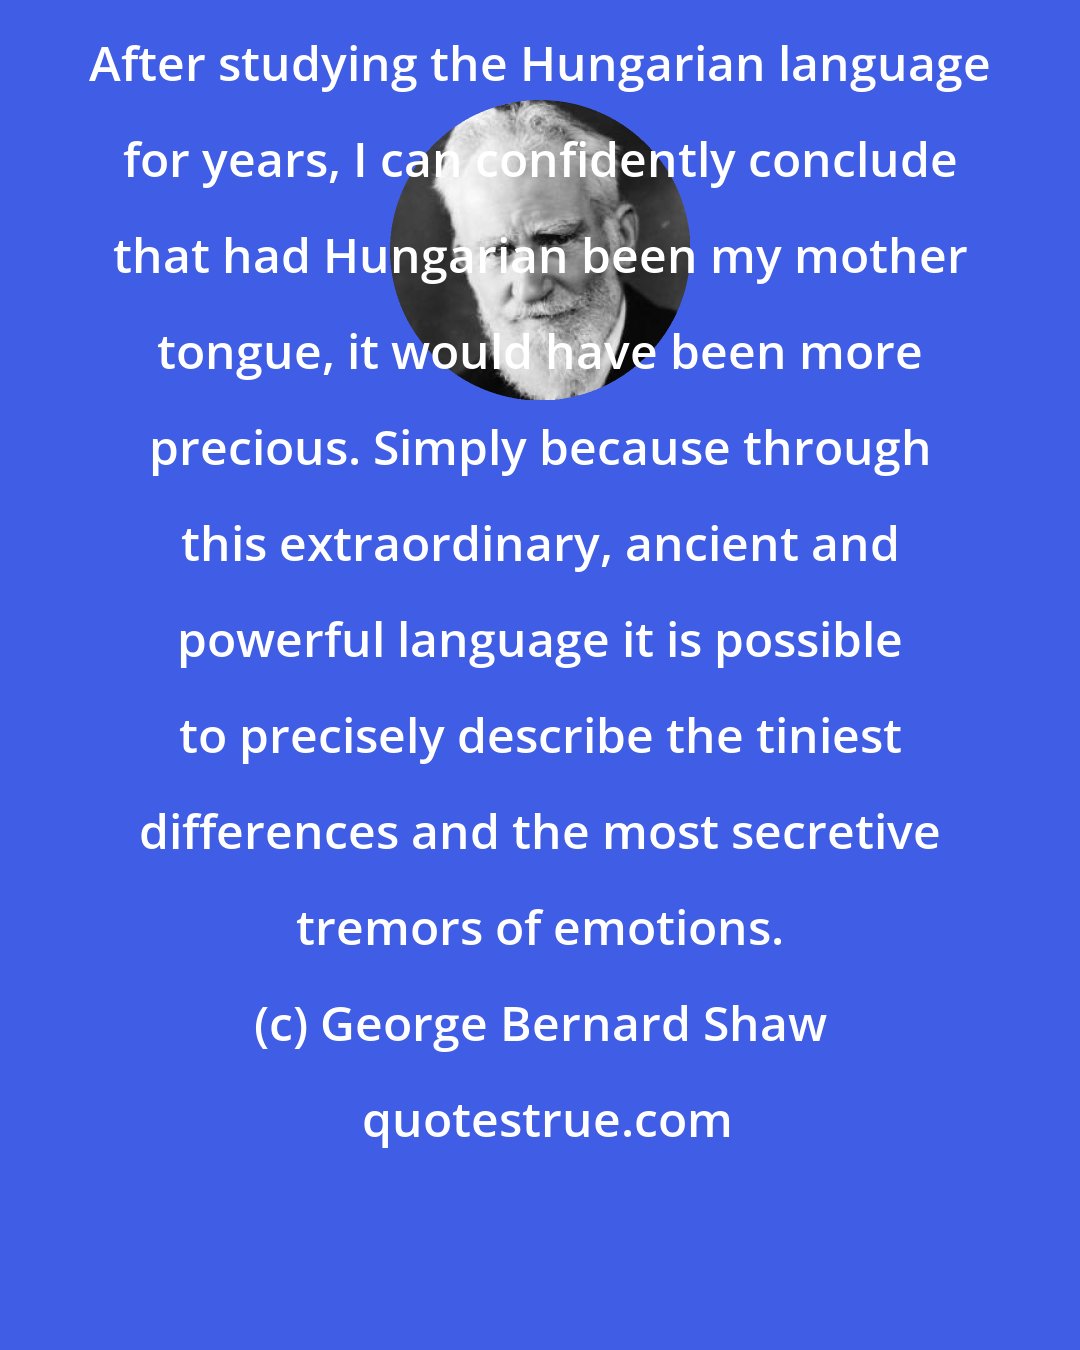 George Bernard Shaw: After studying the Hungarian language for years, I can confidently conclude that had Hungarian been my mother tongue, it would have been more precious. Simply because through this extraordinary, ancient and powerful language it is possible to precisely describe the tiniest differences and the most secretive tremors of emotions.